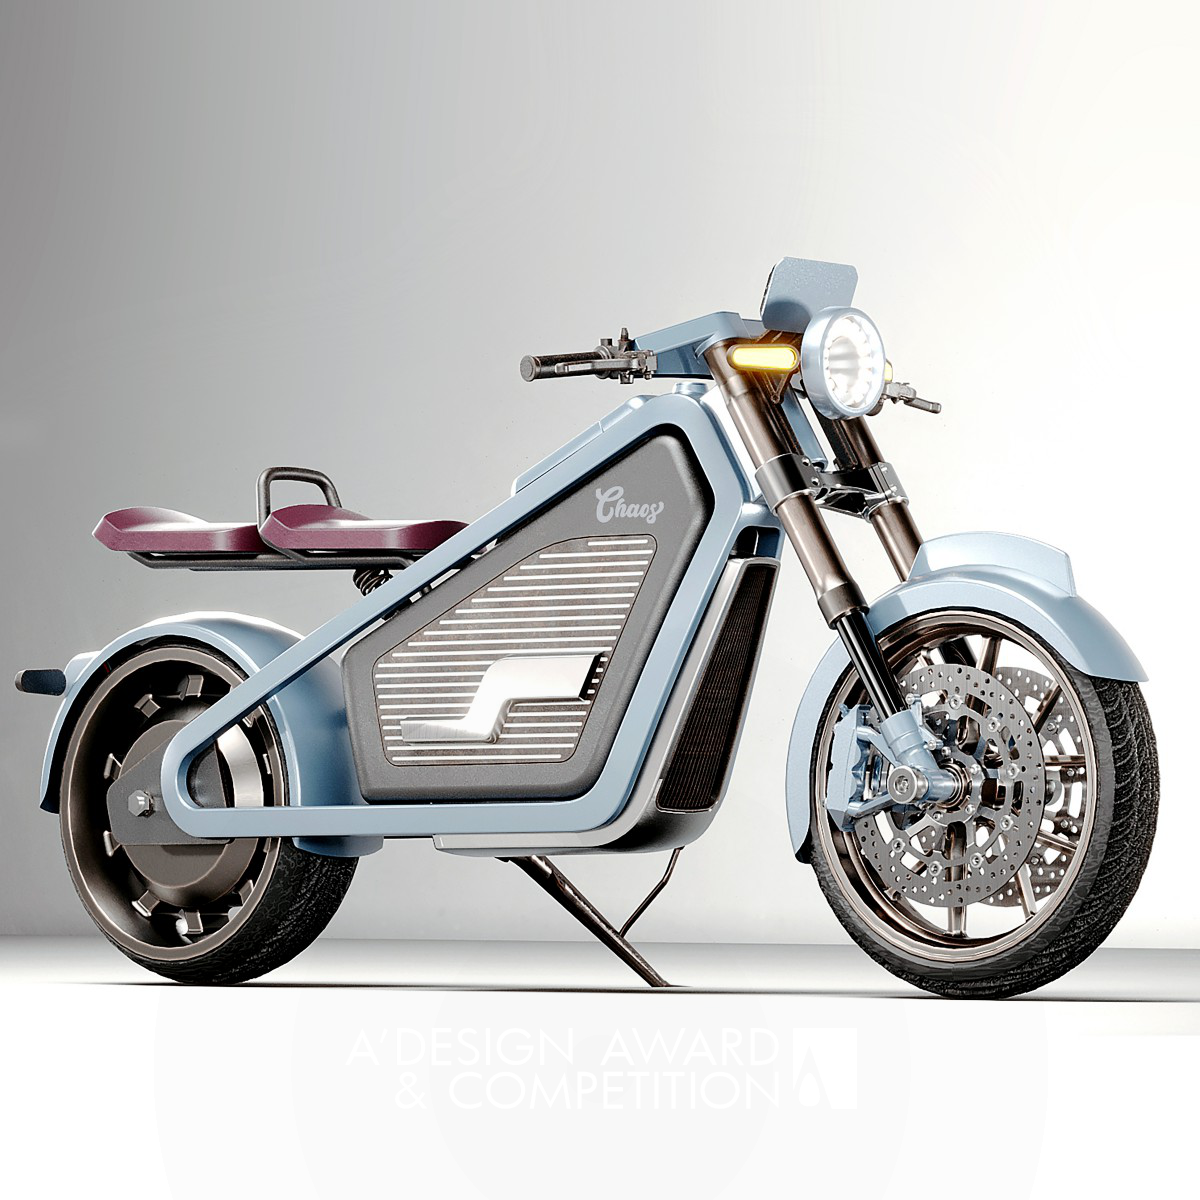 Chaos Electric Motorcycle by Asbjoerk Stanly Mogensen